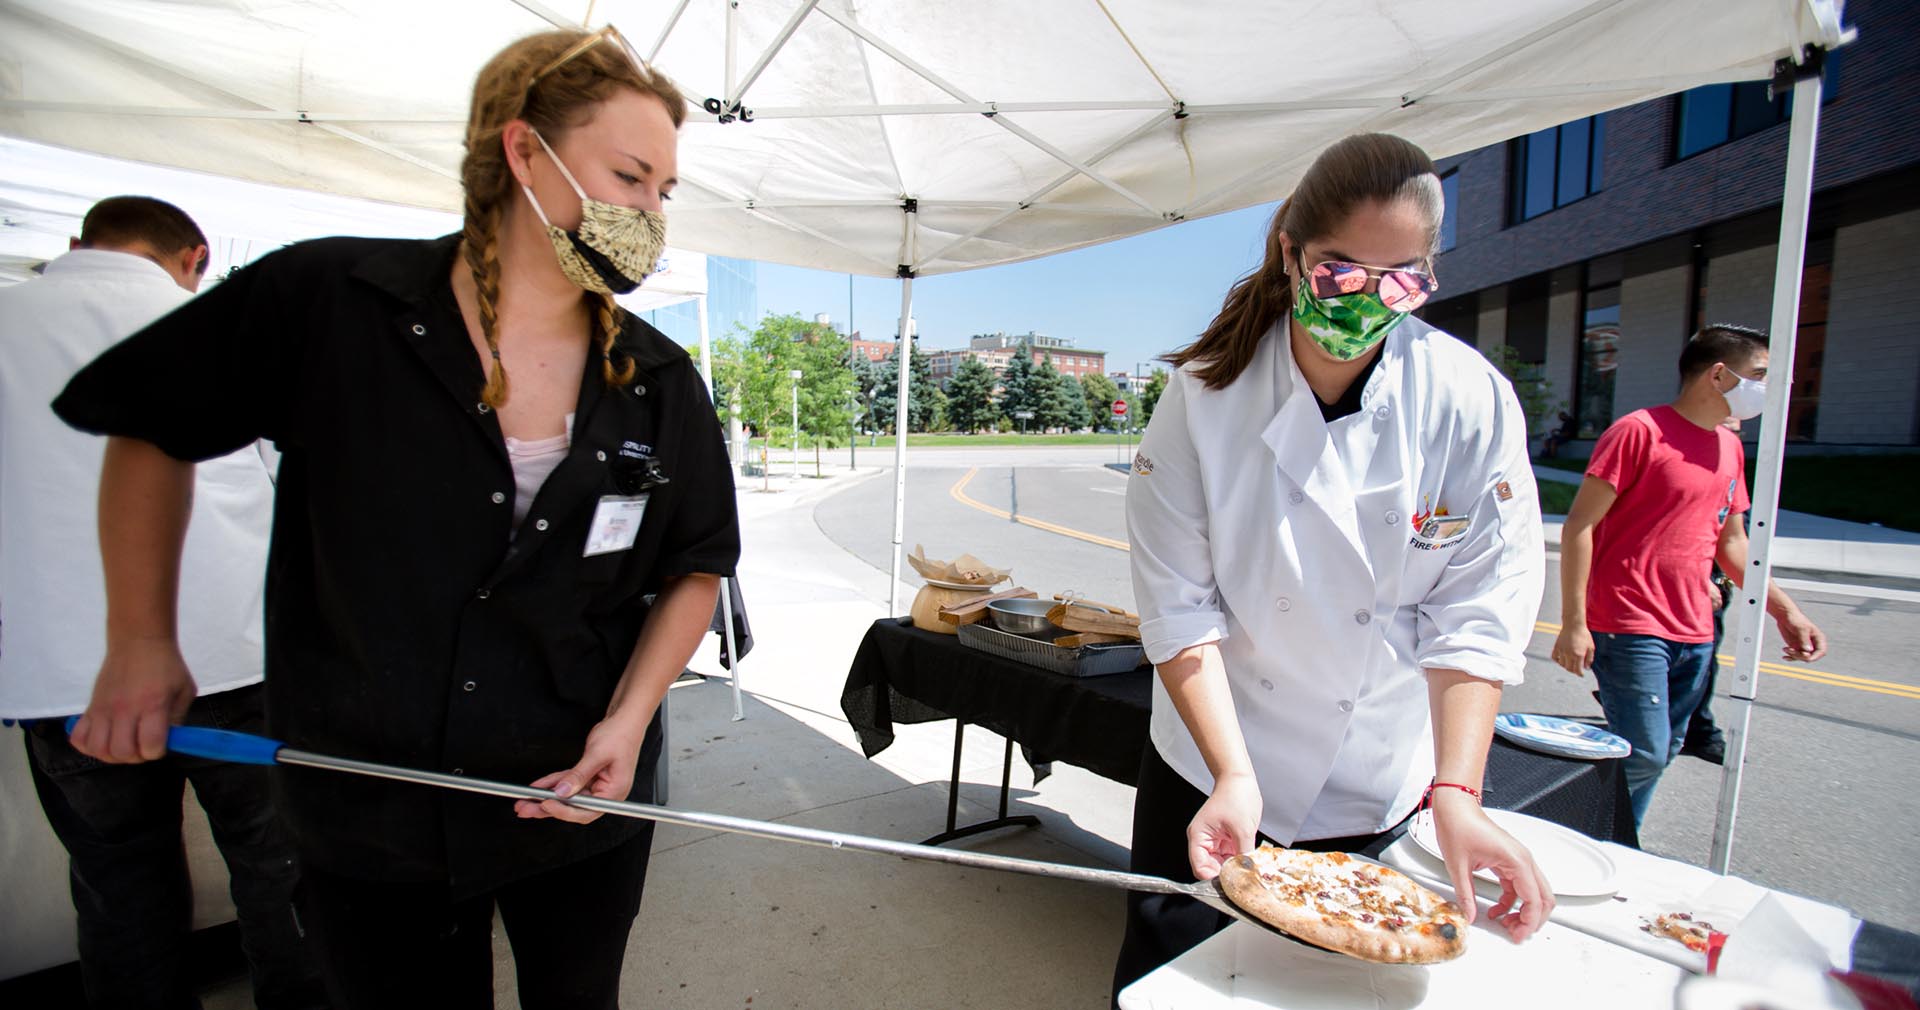 Pizza prospers amid pandemic